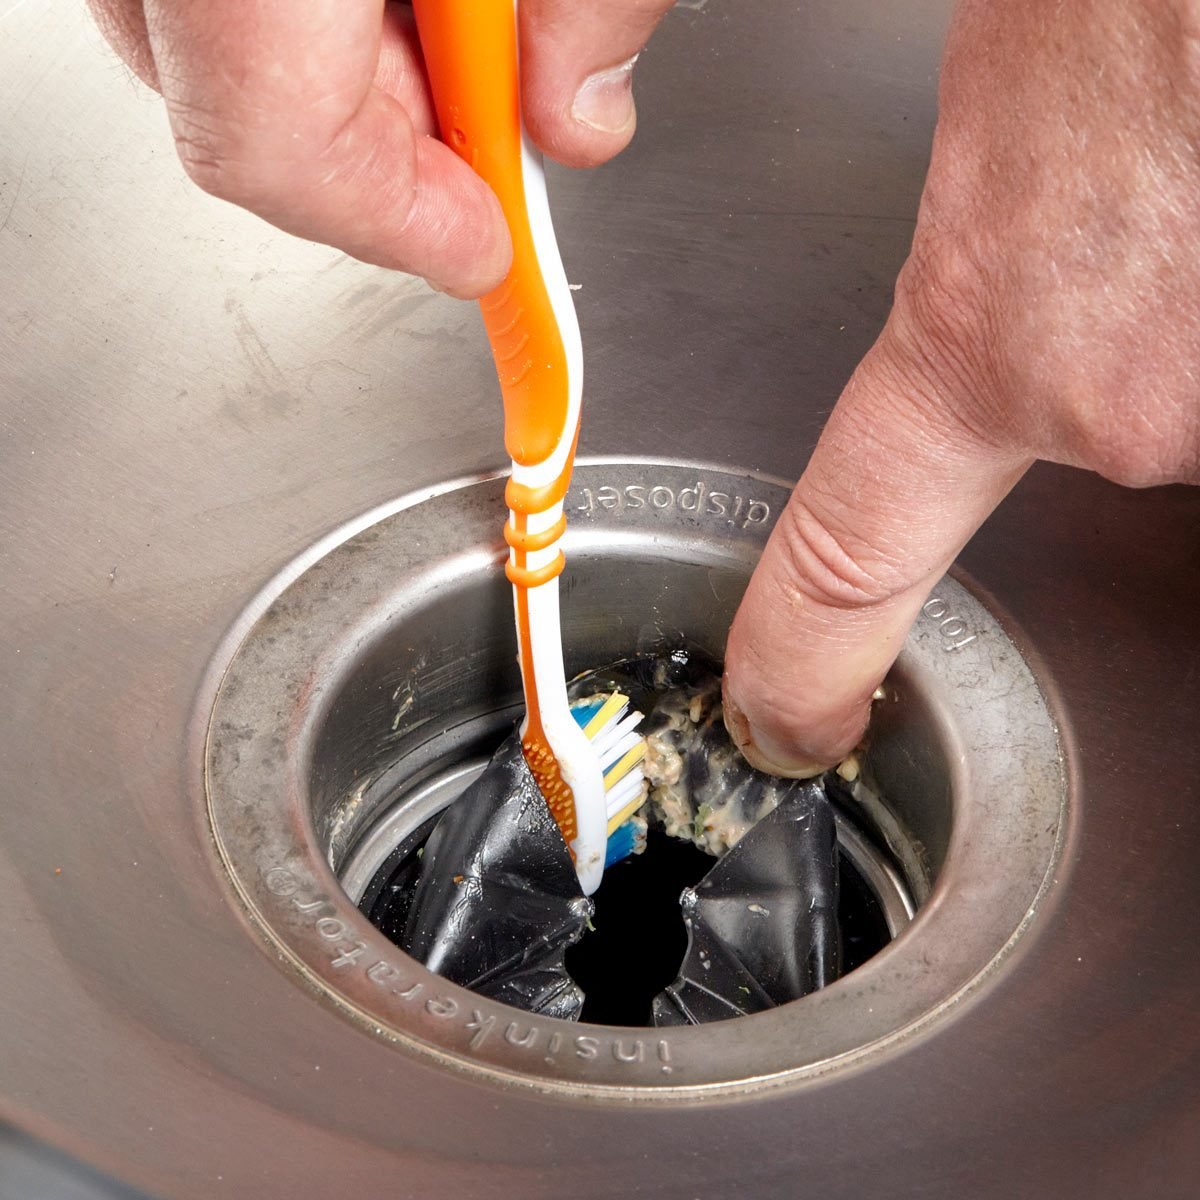 Garbage Disposal Splash Guard Slow to Drain? Here's How to Fix